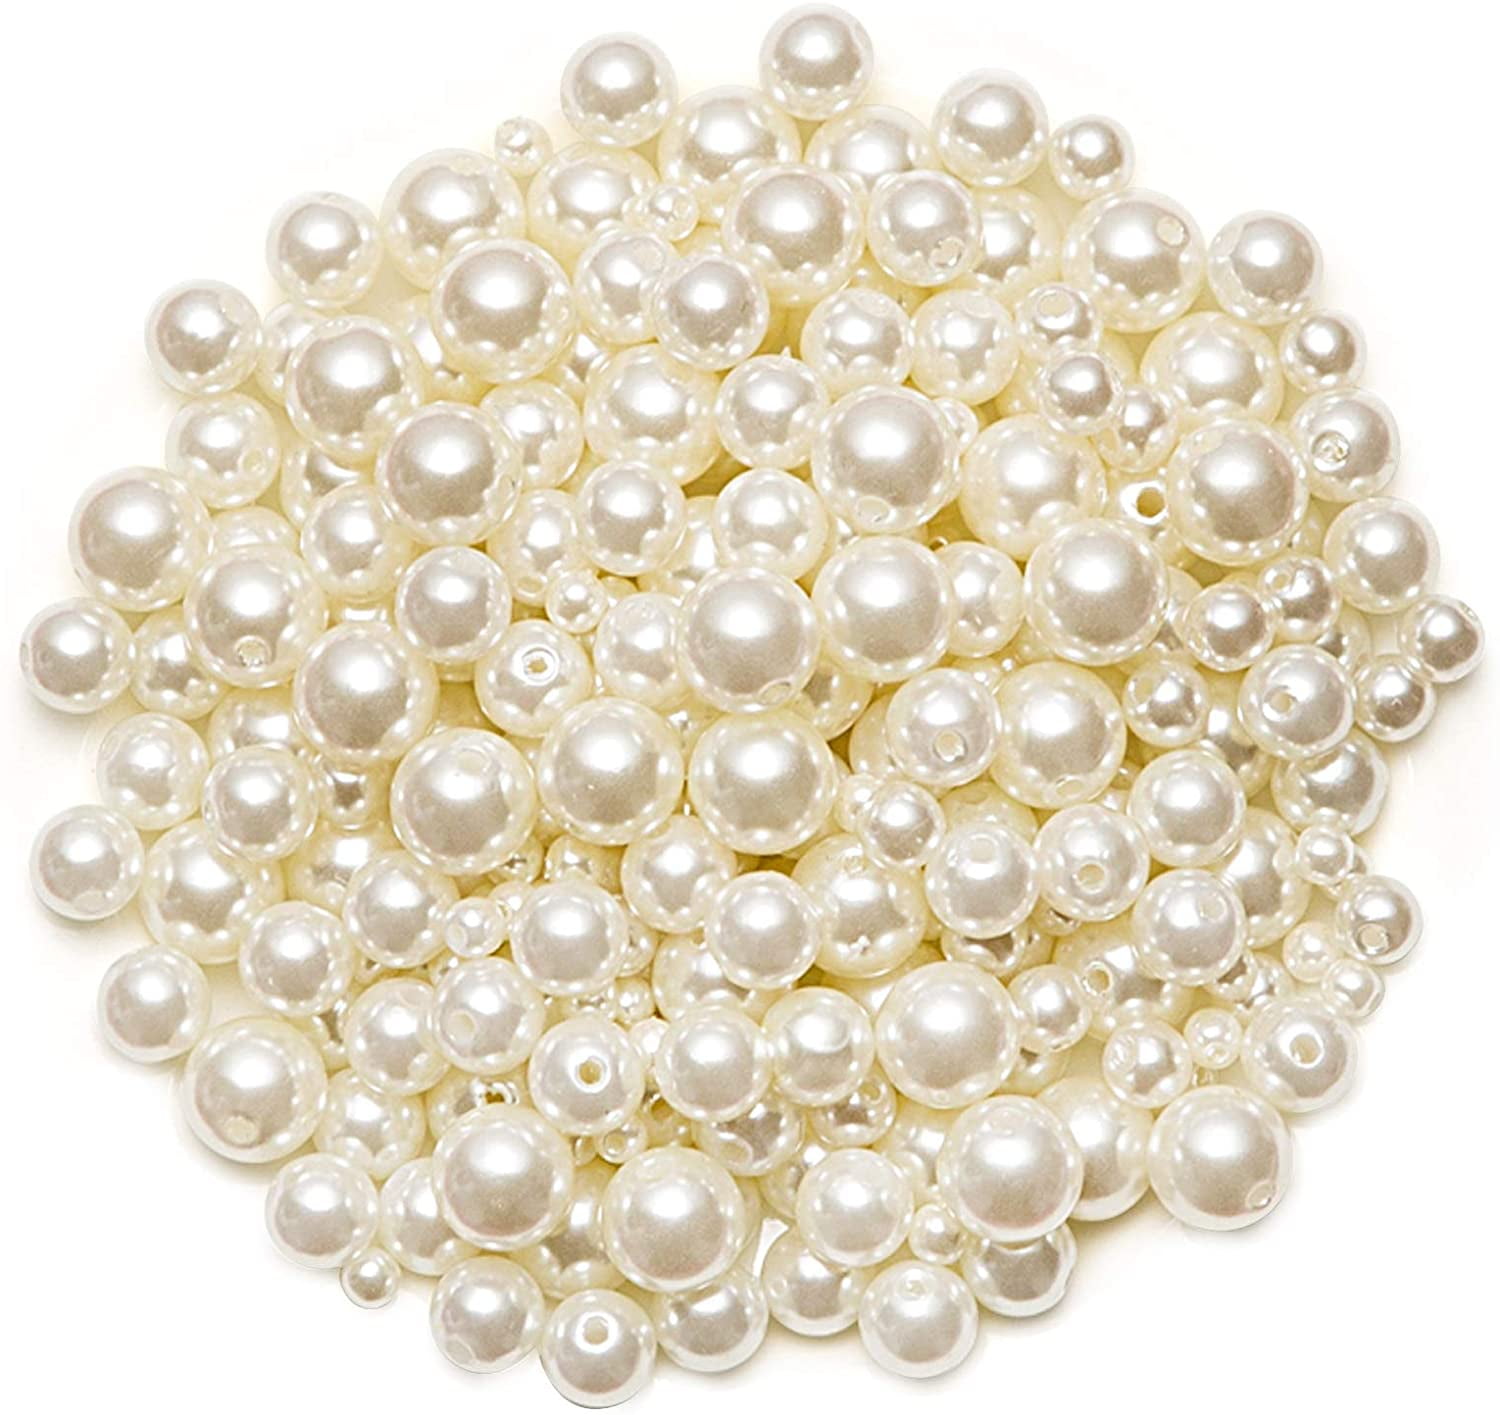 Naler 500Pcs Assorted Pearl Beads for DIY Jewelry Making Vase Fillers Table  Scatter Wedding Birthday Party Home Decoration, Ivory&White Color